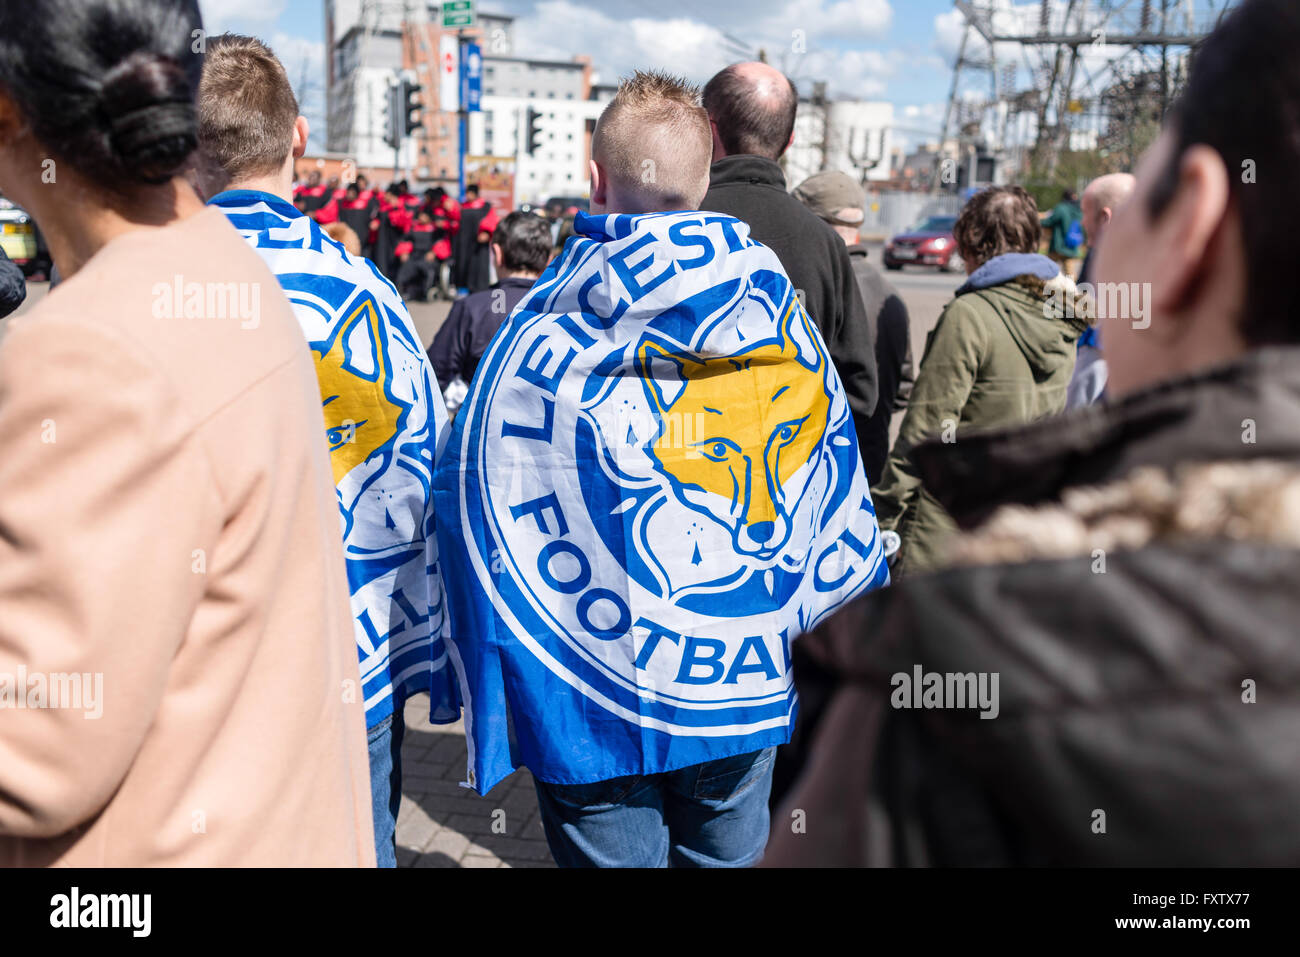 Leicester City Football Club Supporters And Fans 2016,UK. Stock Photo